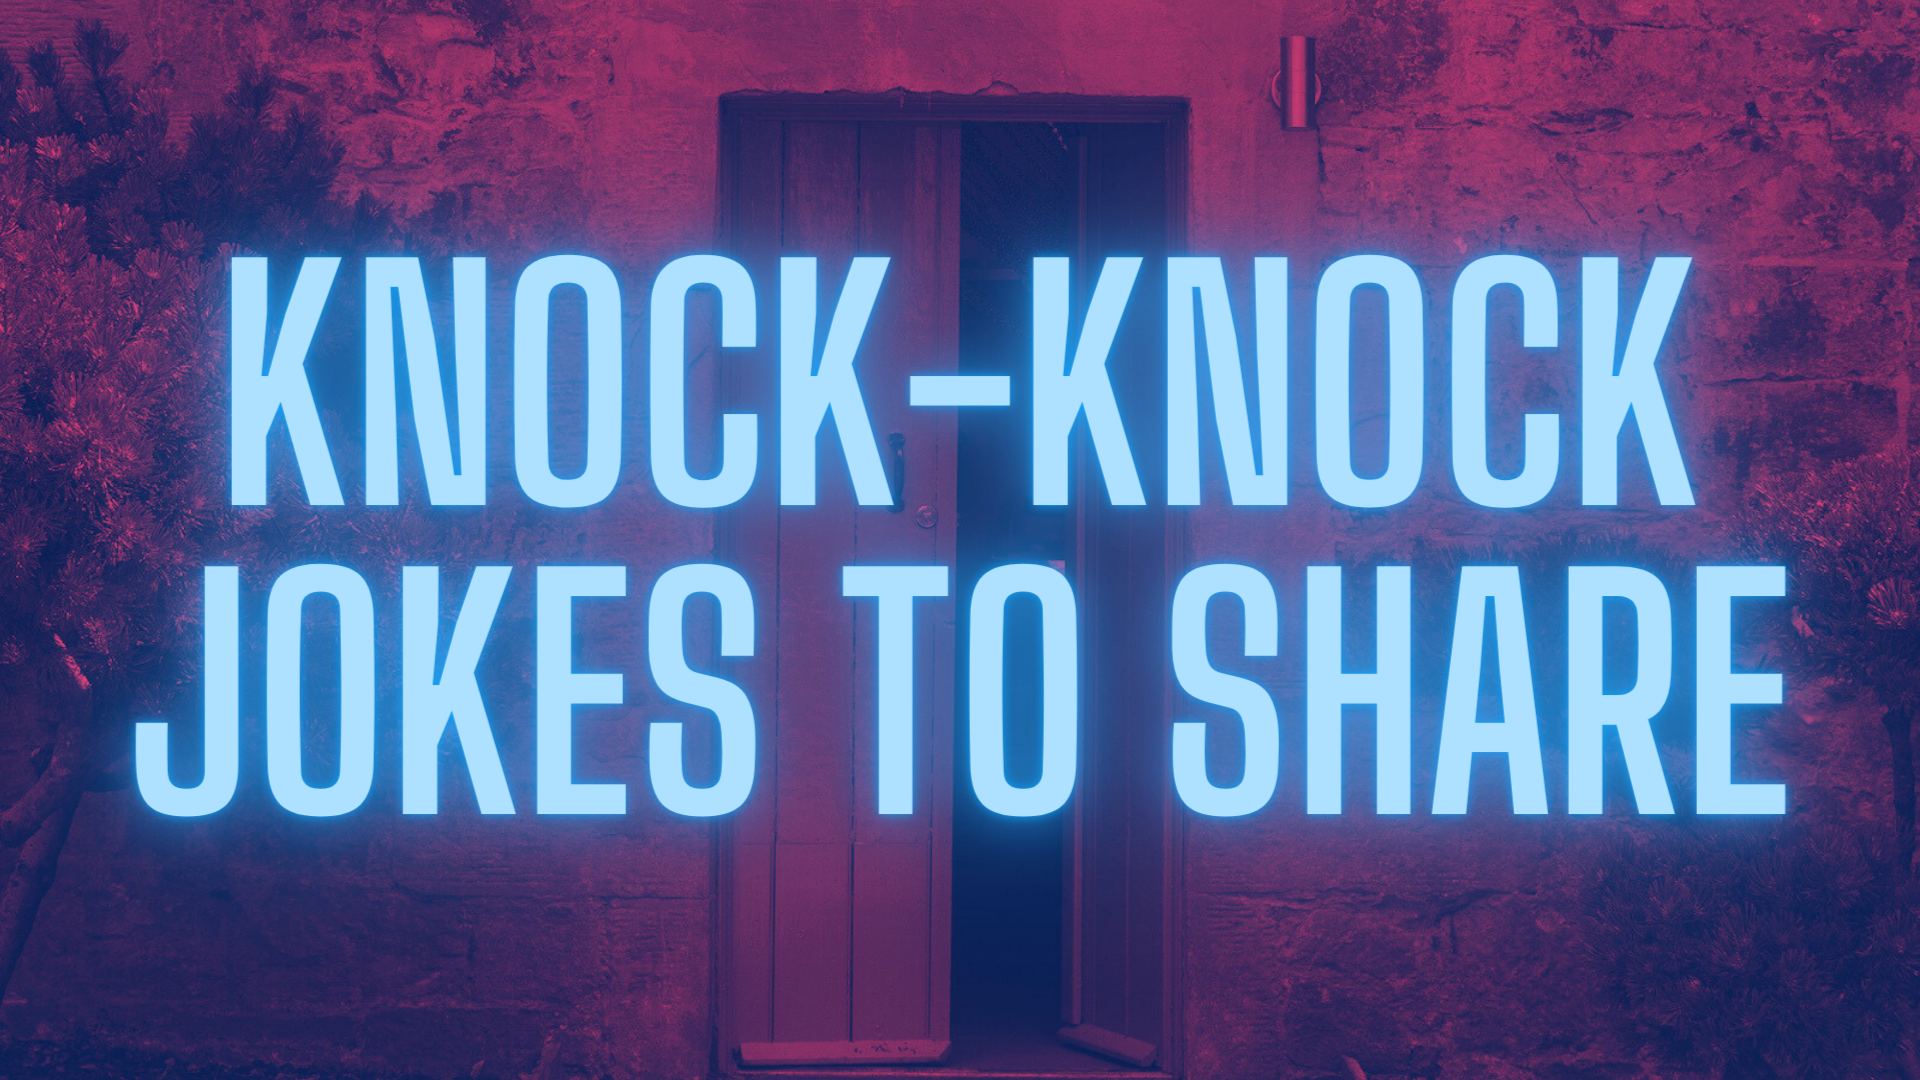 Knock-knock jokes to share with your kids